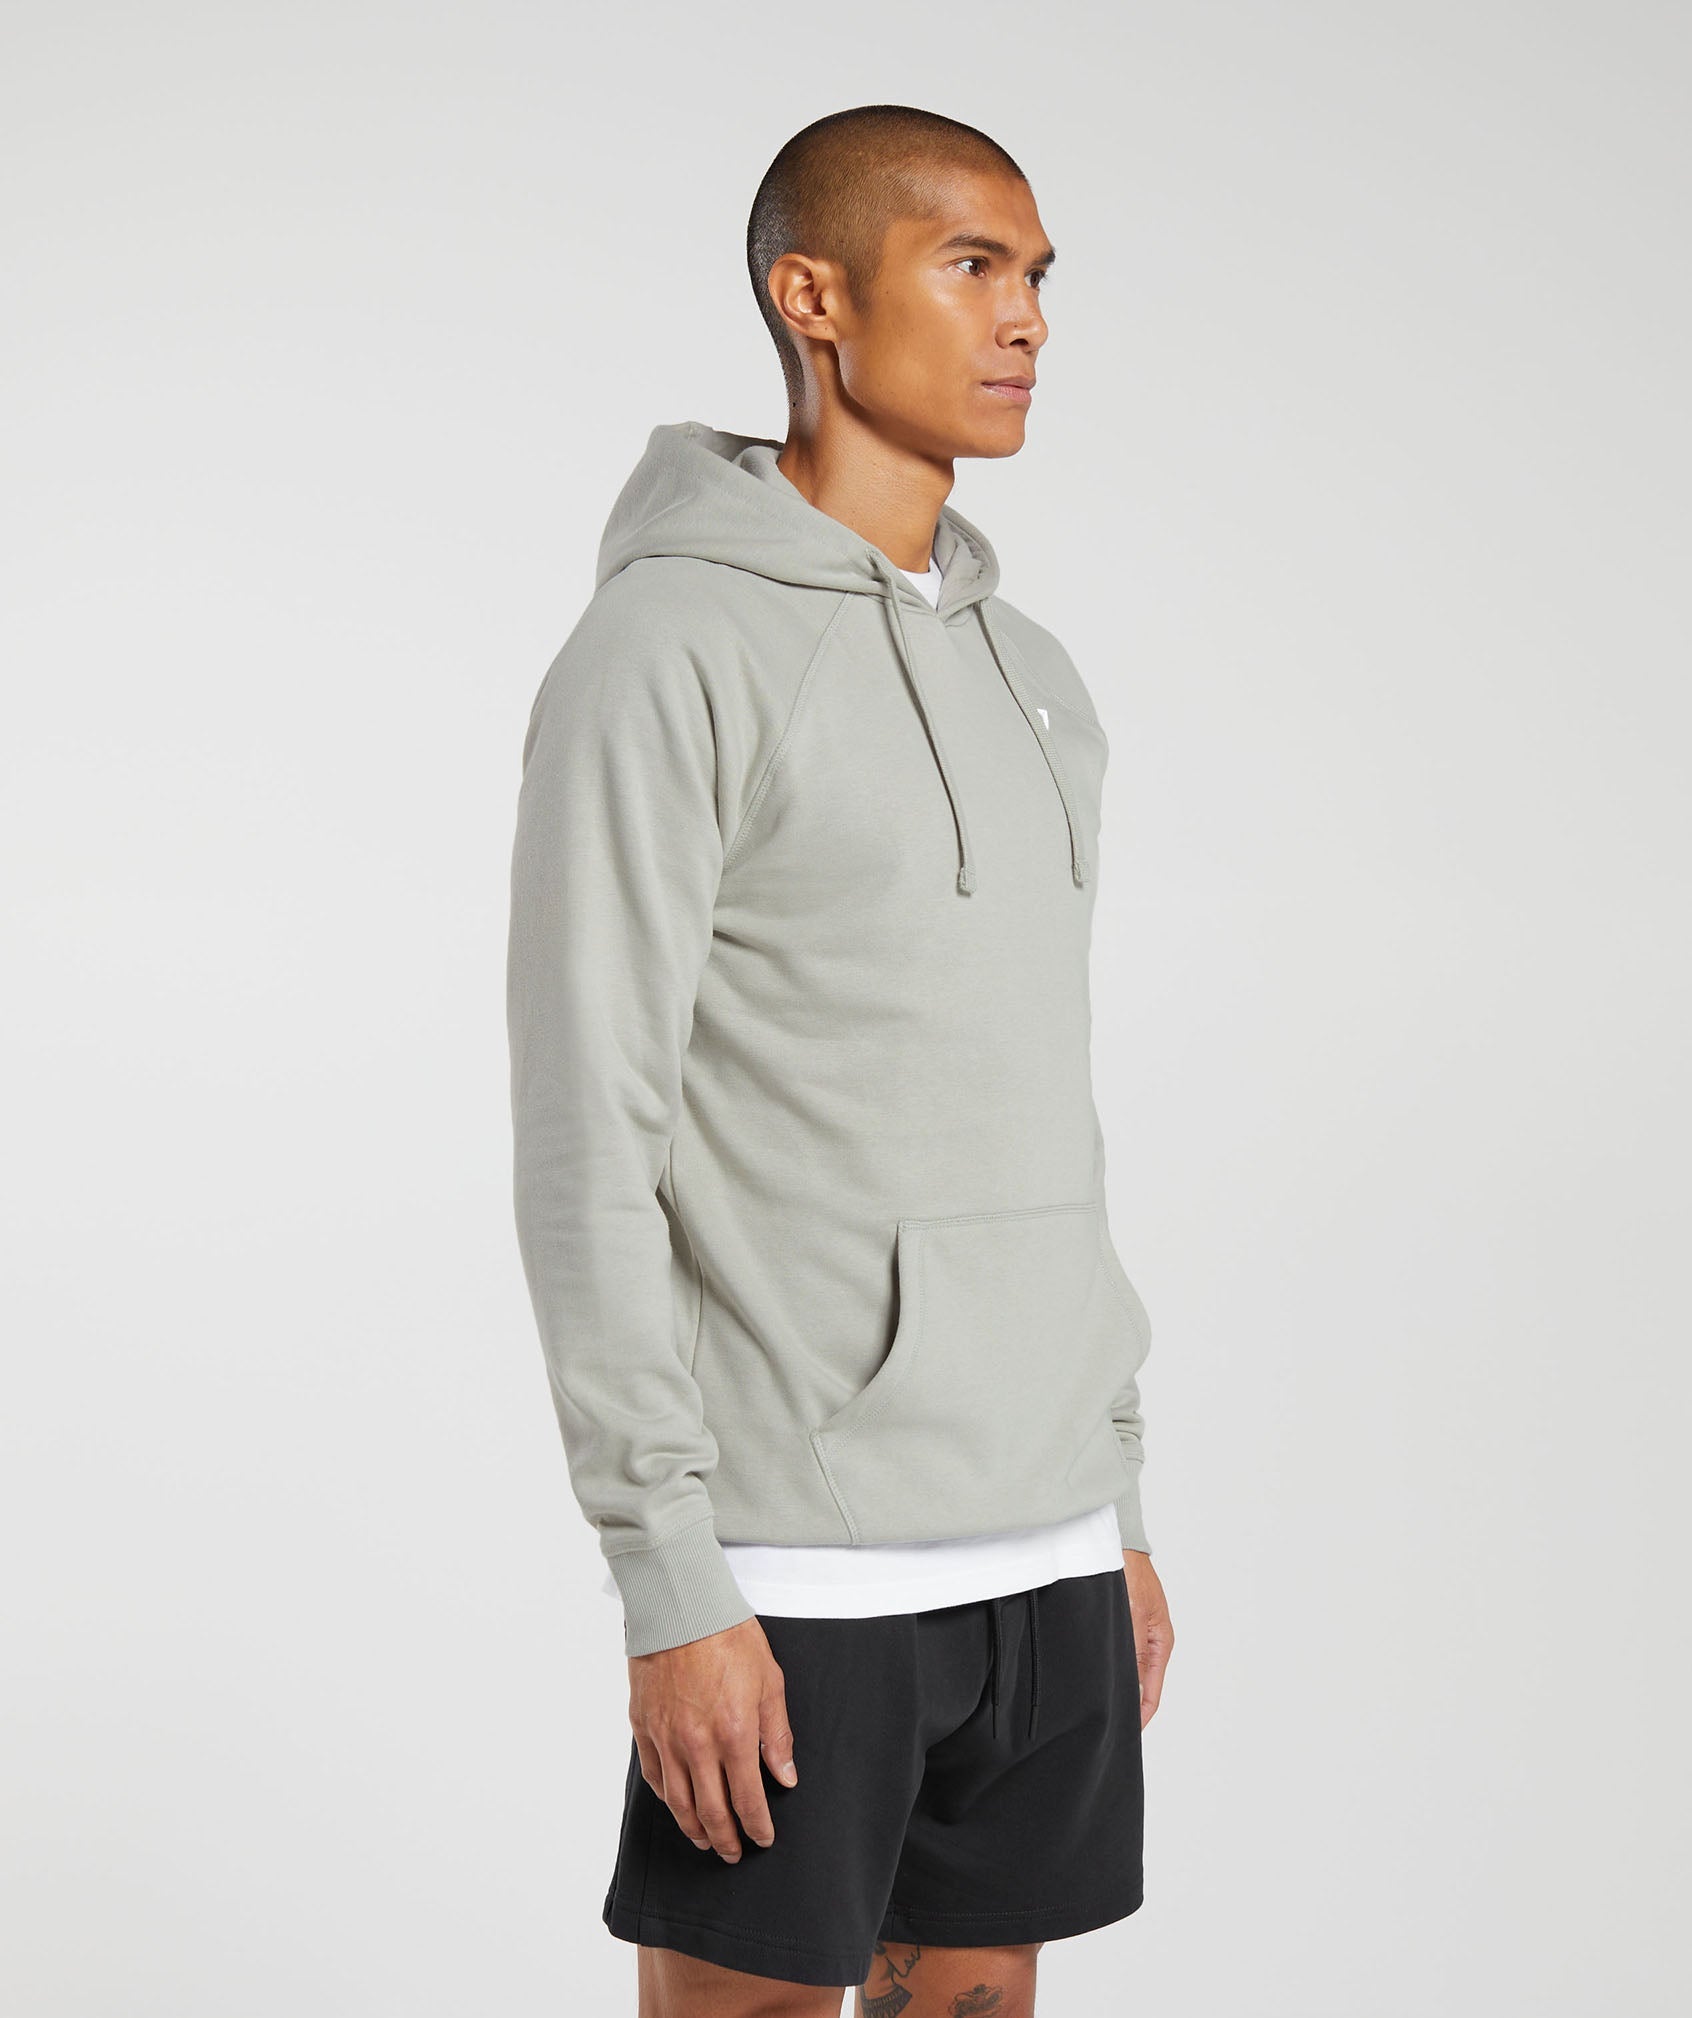 Gymshark - Ready for the streets. Shop the Crest Pullover Hoodie at Gymshark.com